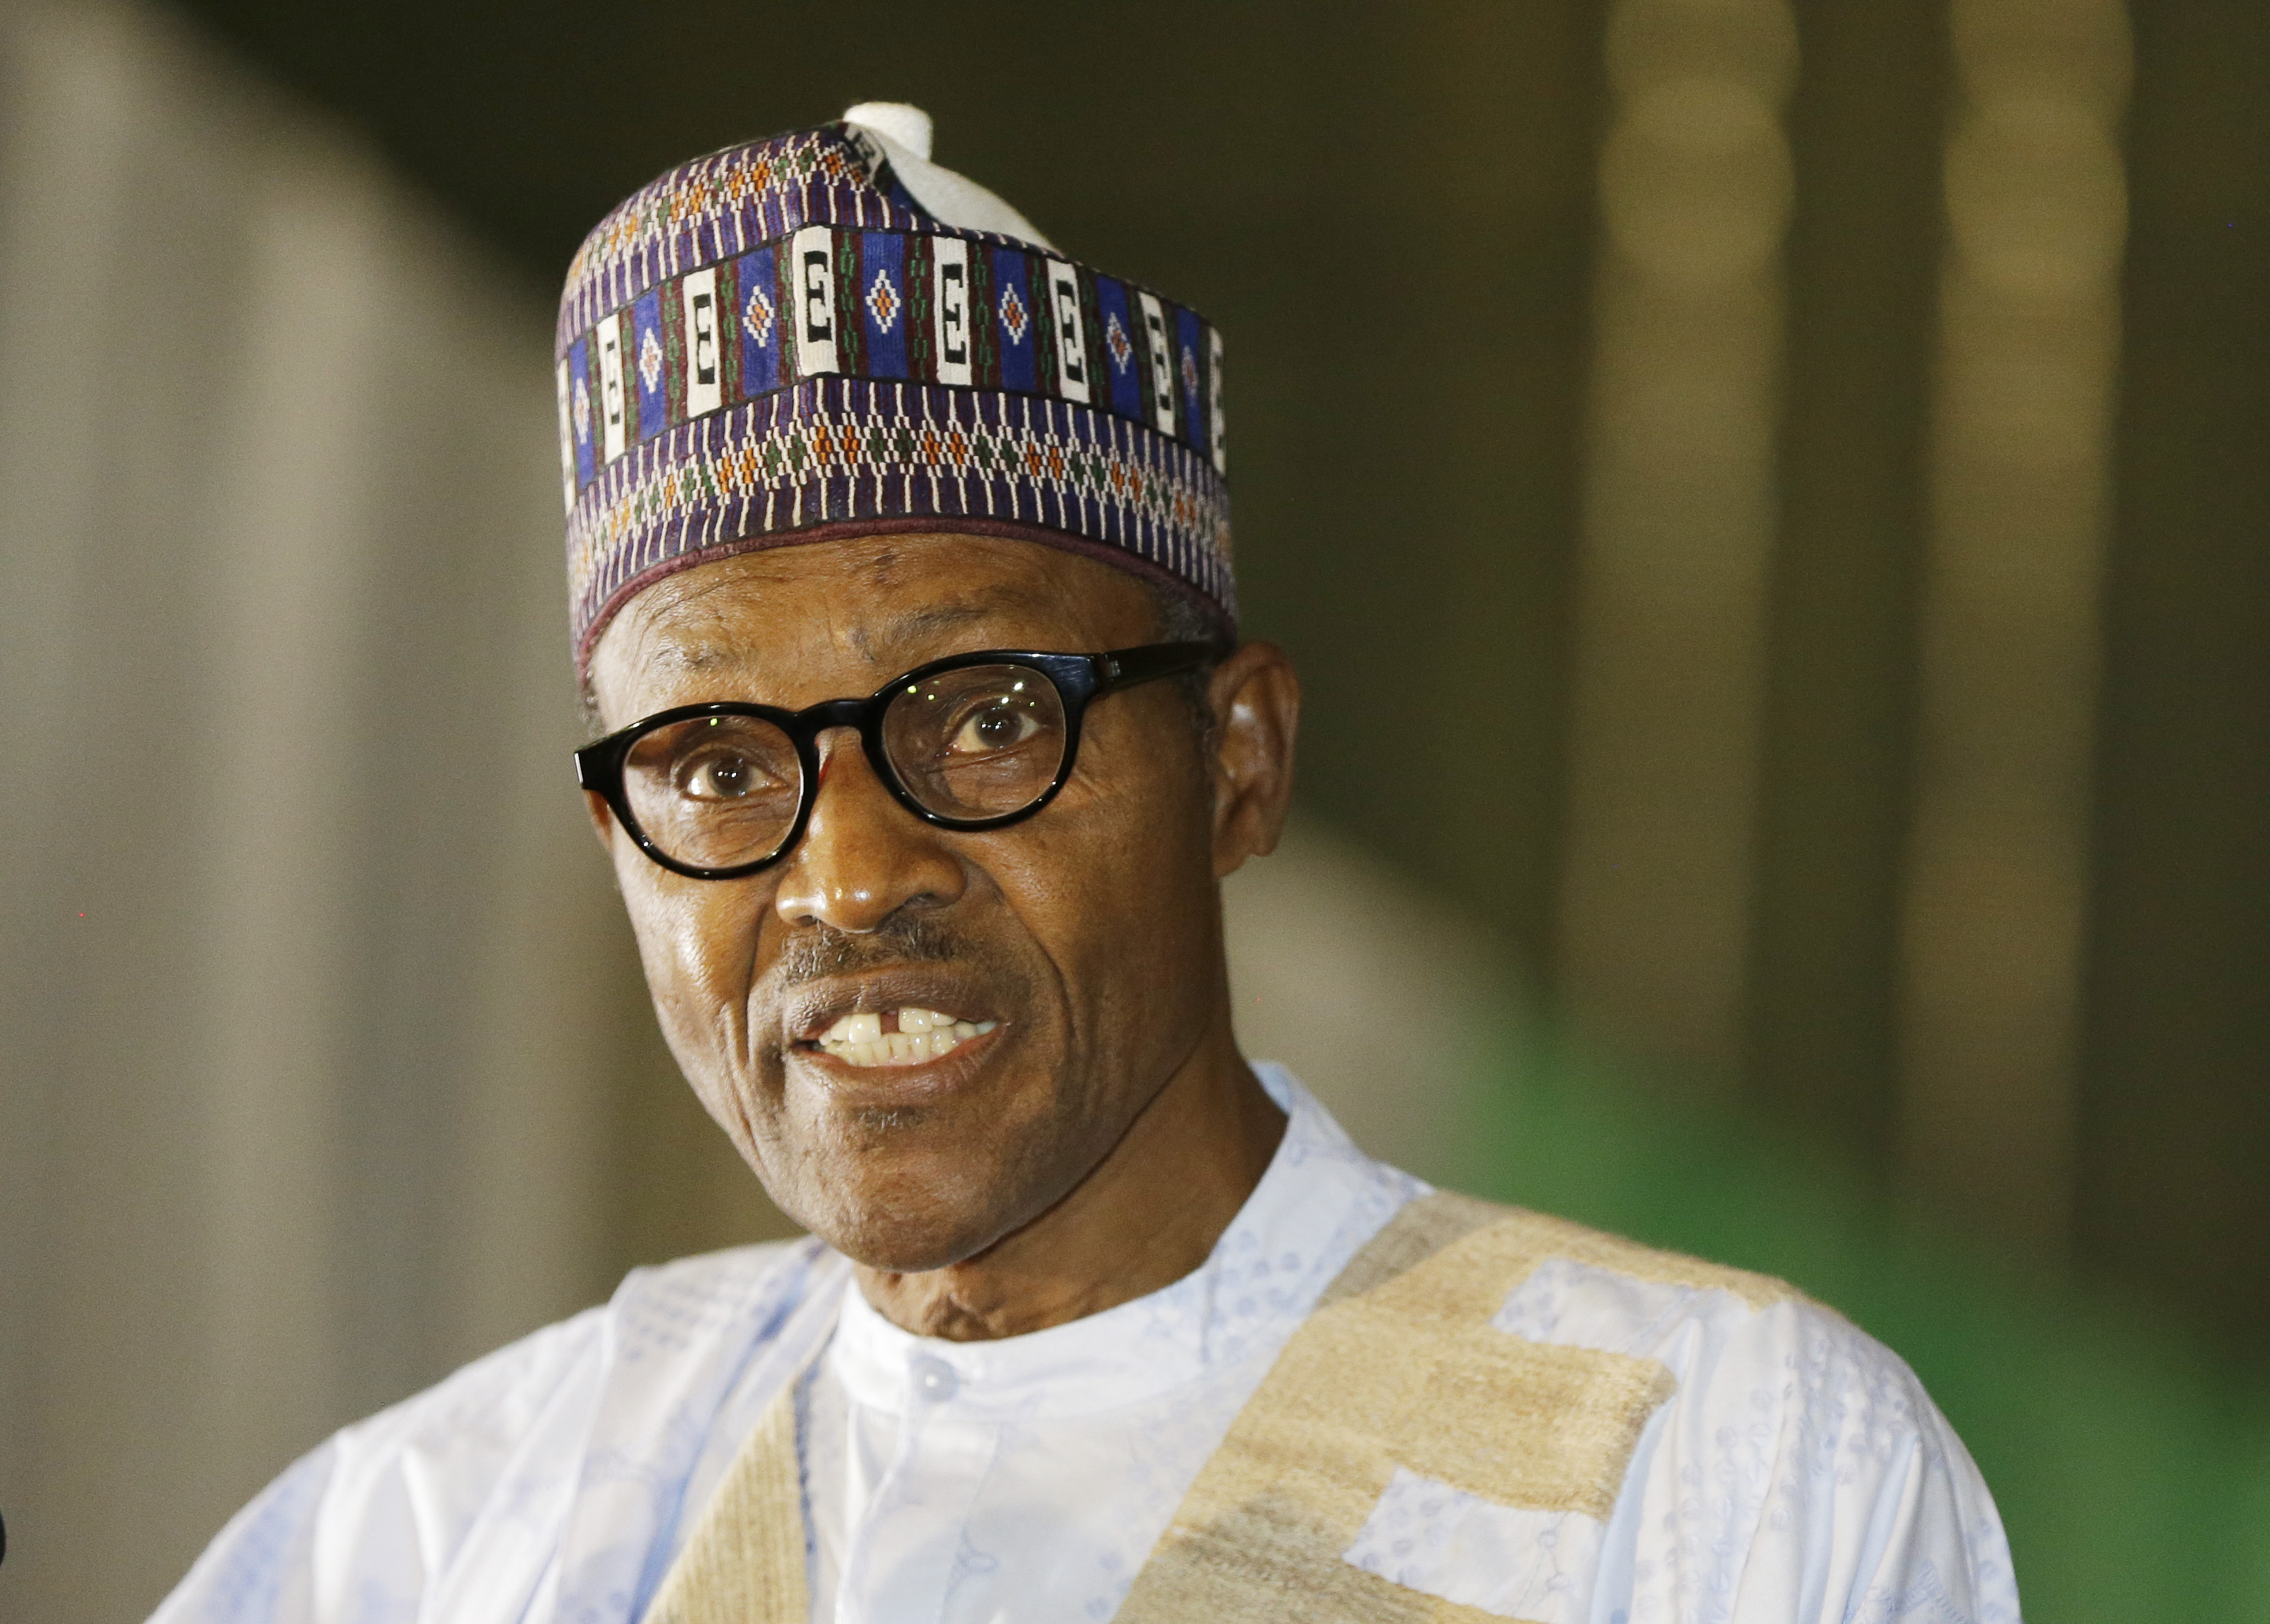 Nigeria's President Muhammadu Buhari denies claims that he died and was